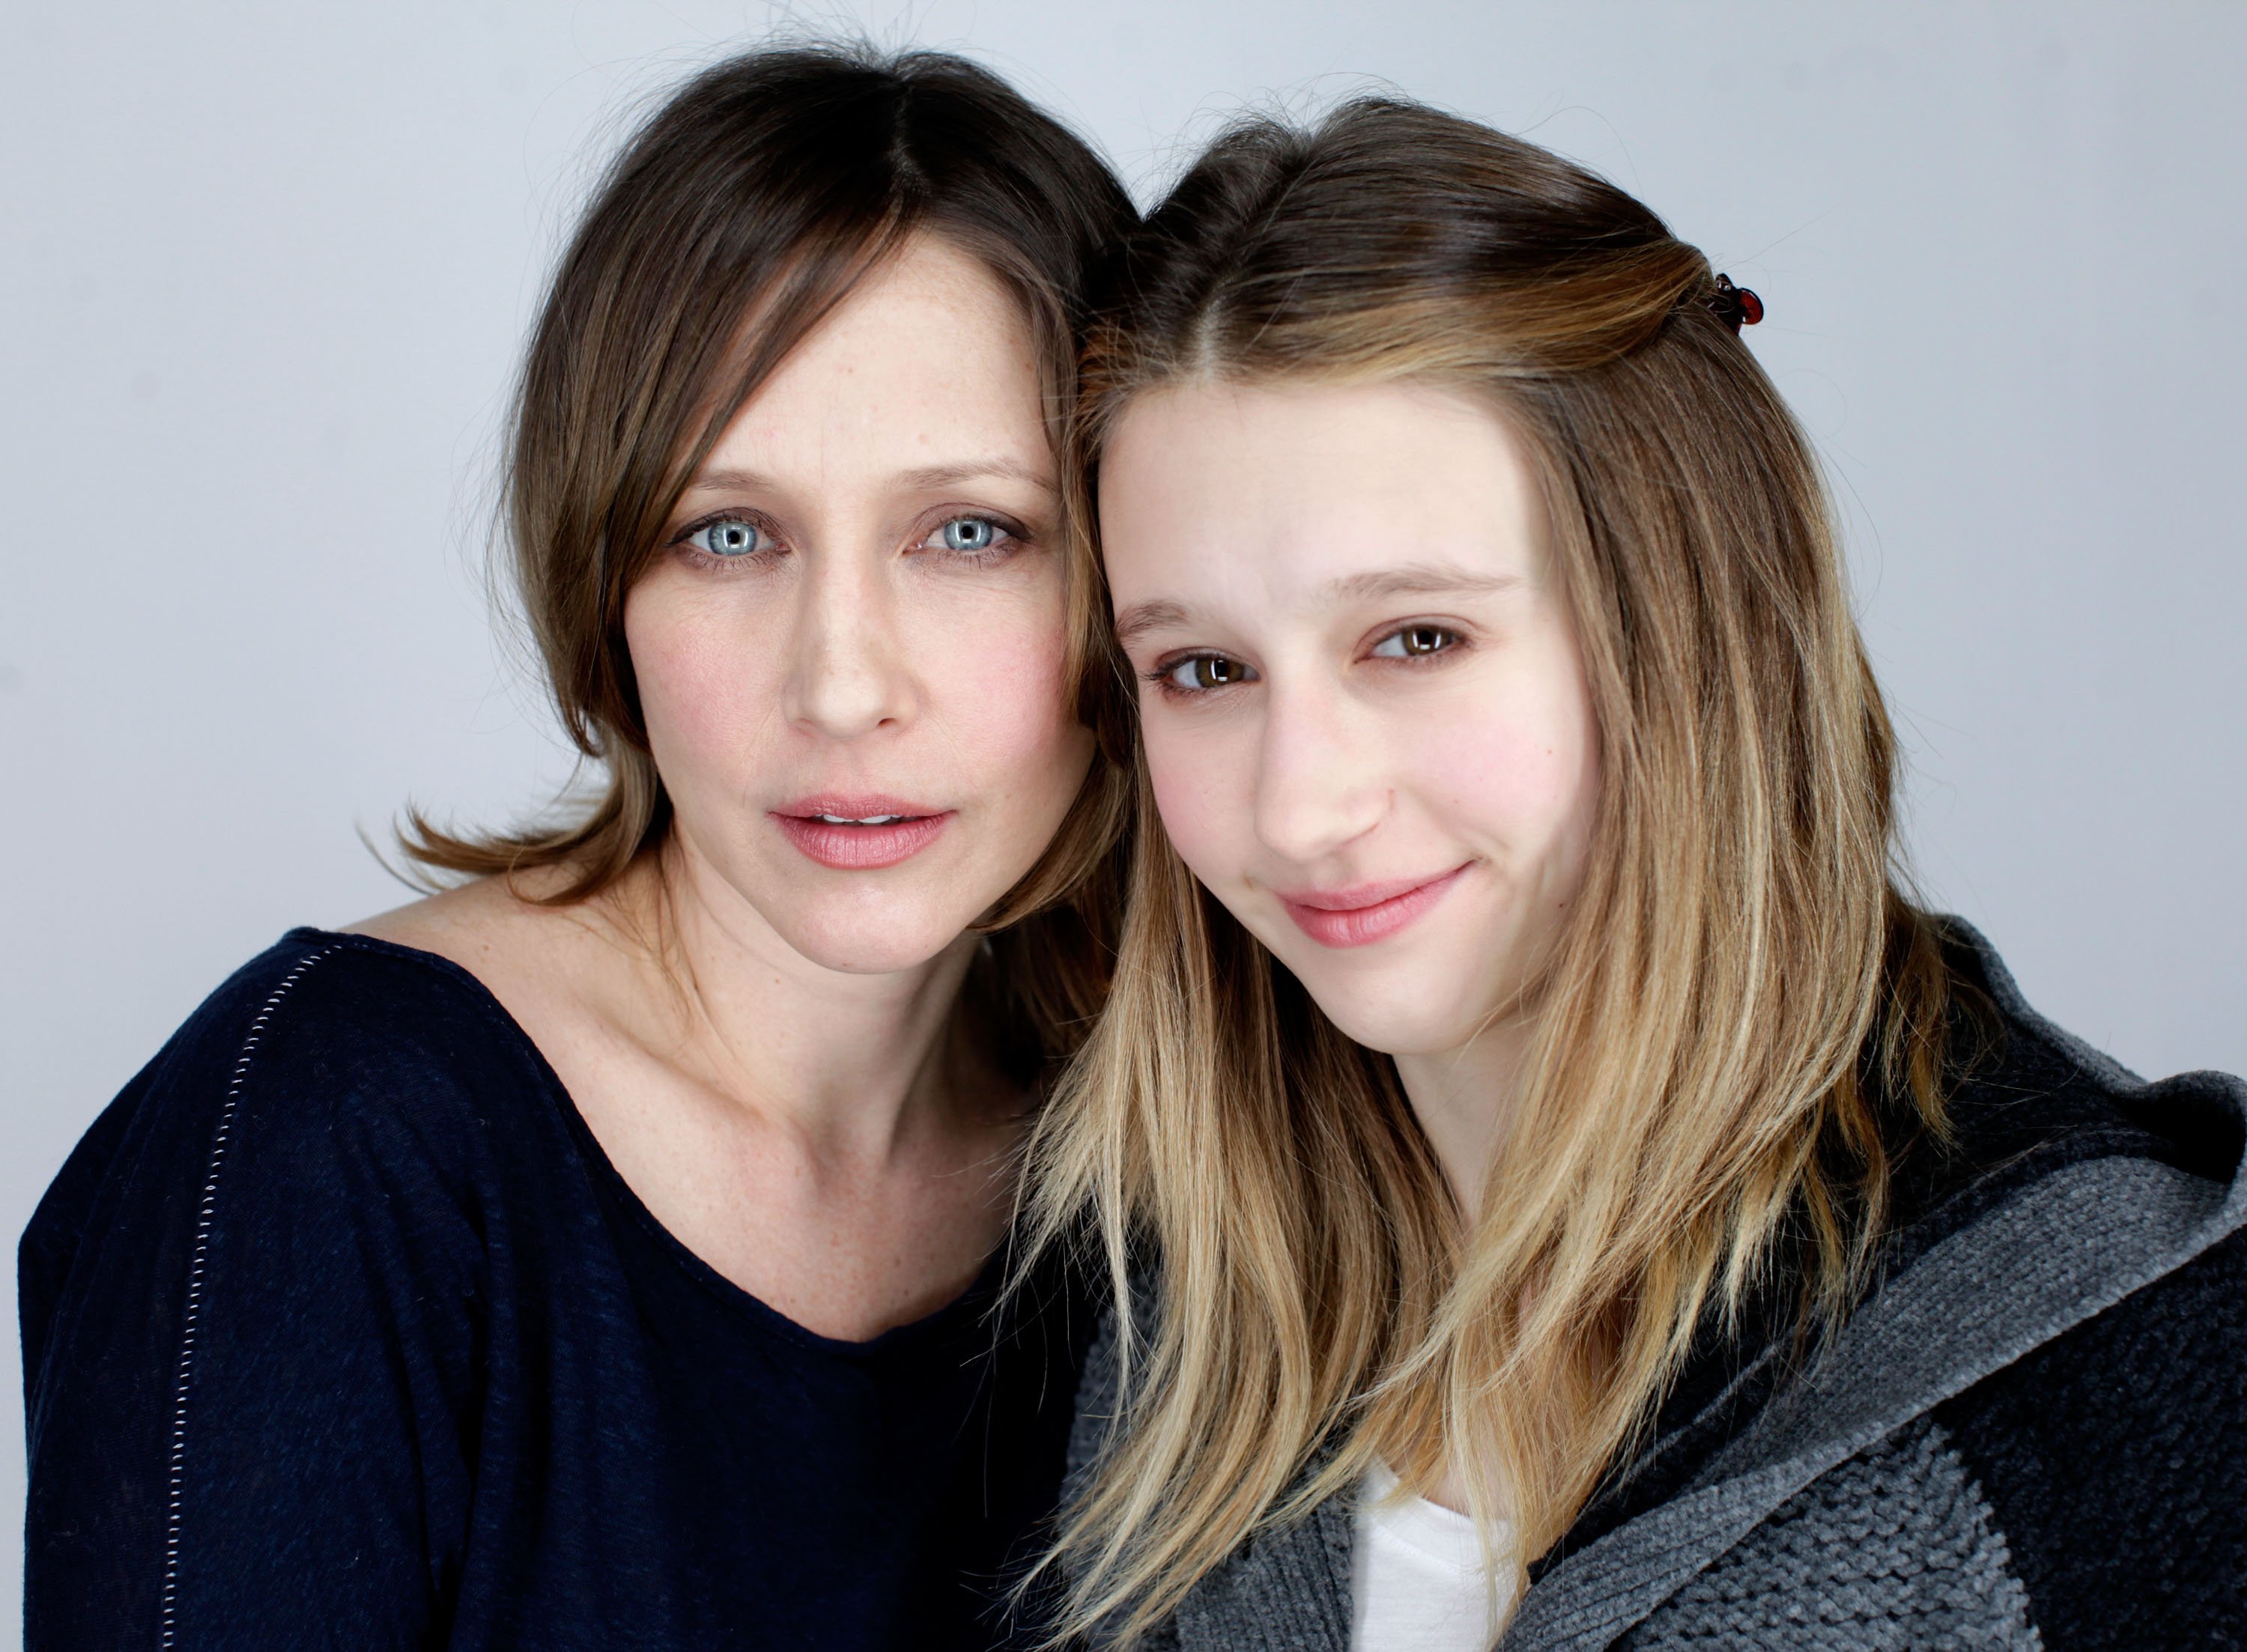 Director/actress Vera Farmiga (L) and actress Taissa Farmiga pose for a portrait during the 2011 Sundance Film Festival on January 24, 2011, in Park City, Utah. | Source: Getty Images